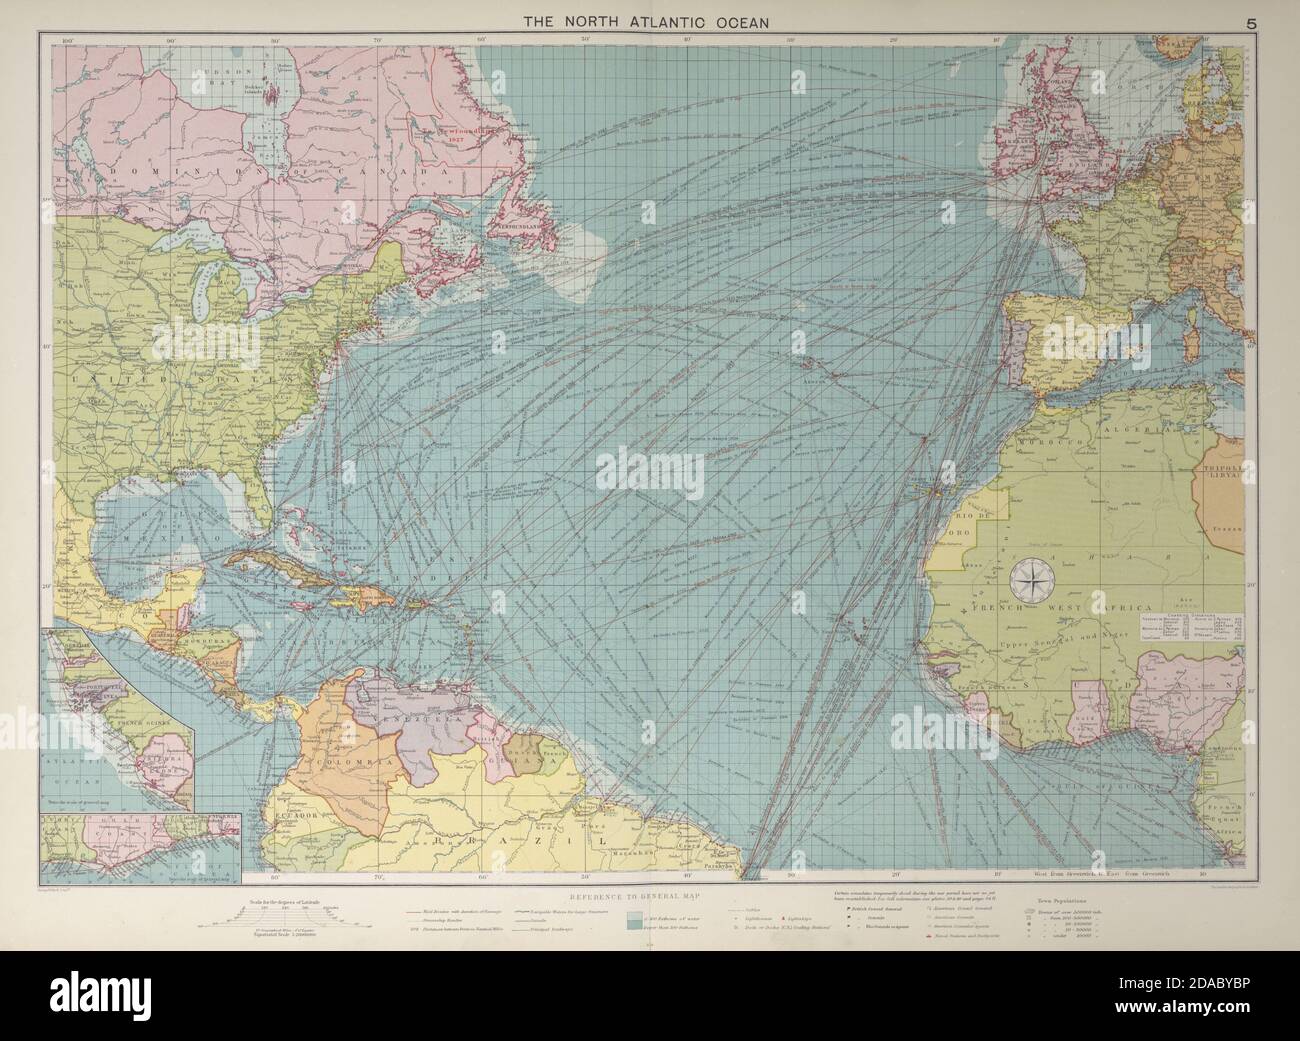 North Atlantic Ocean sea chart. Ports lighthouses mail routes. LARGE 1927 map Stock Photo